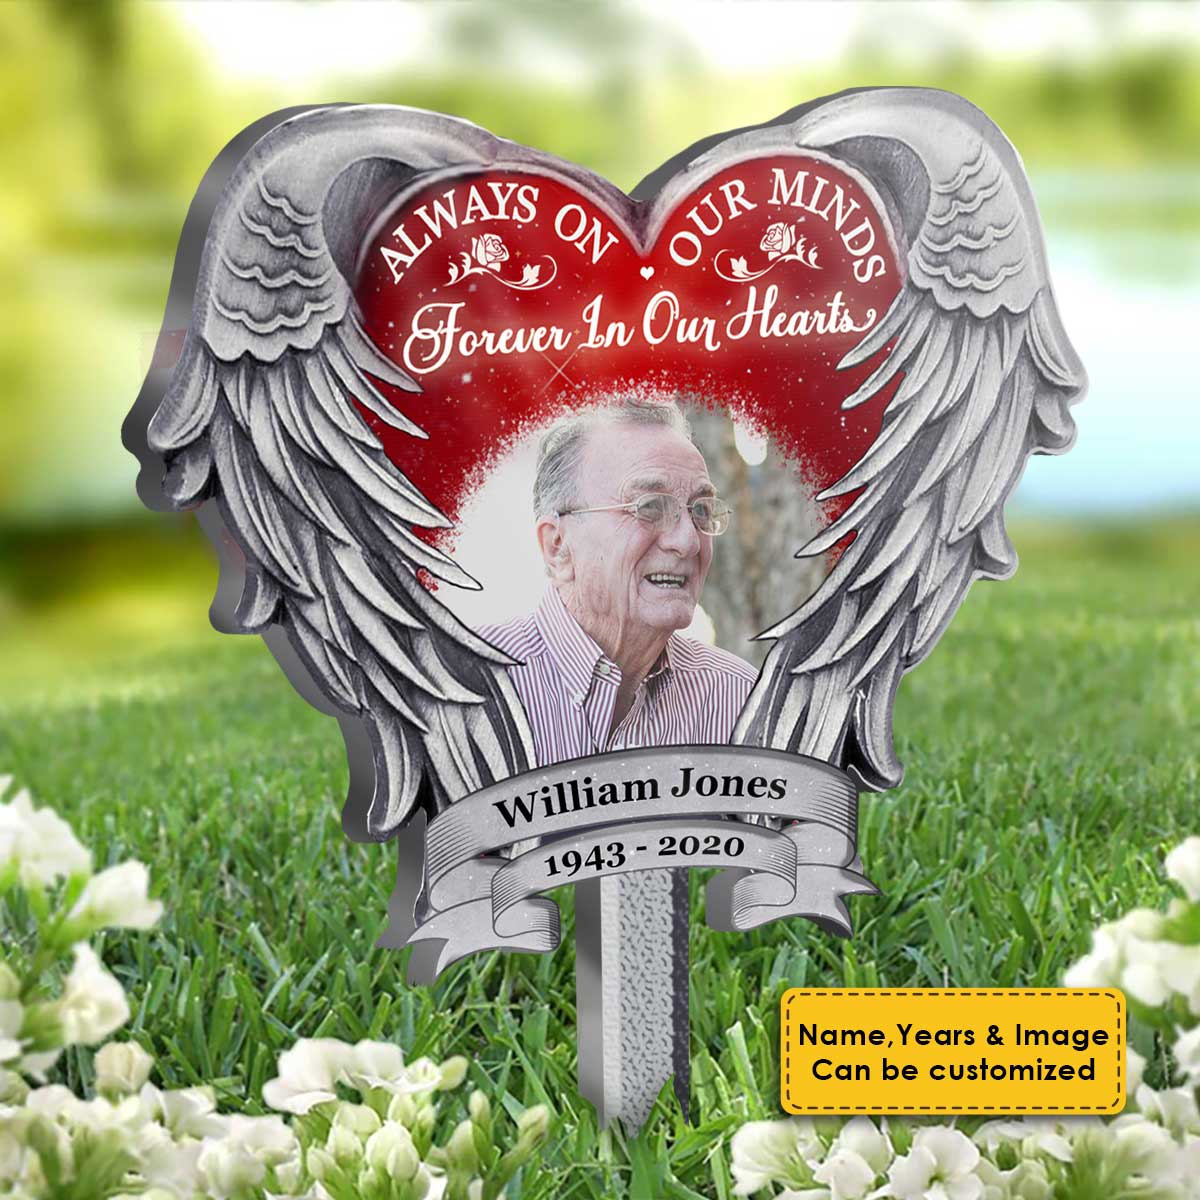 Always On Our Minds, Forever In Our Hearts - Upload Image - Personalized Custom Acrylic Garden Stake